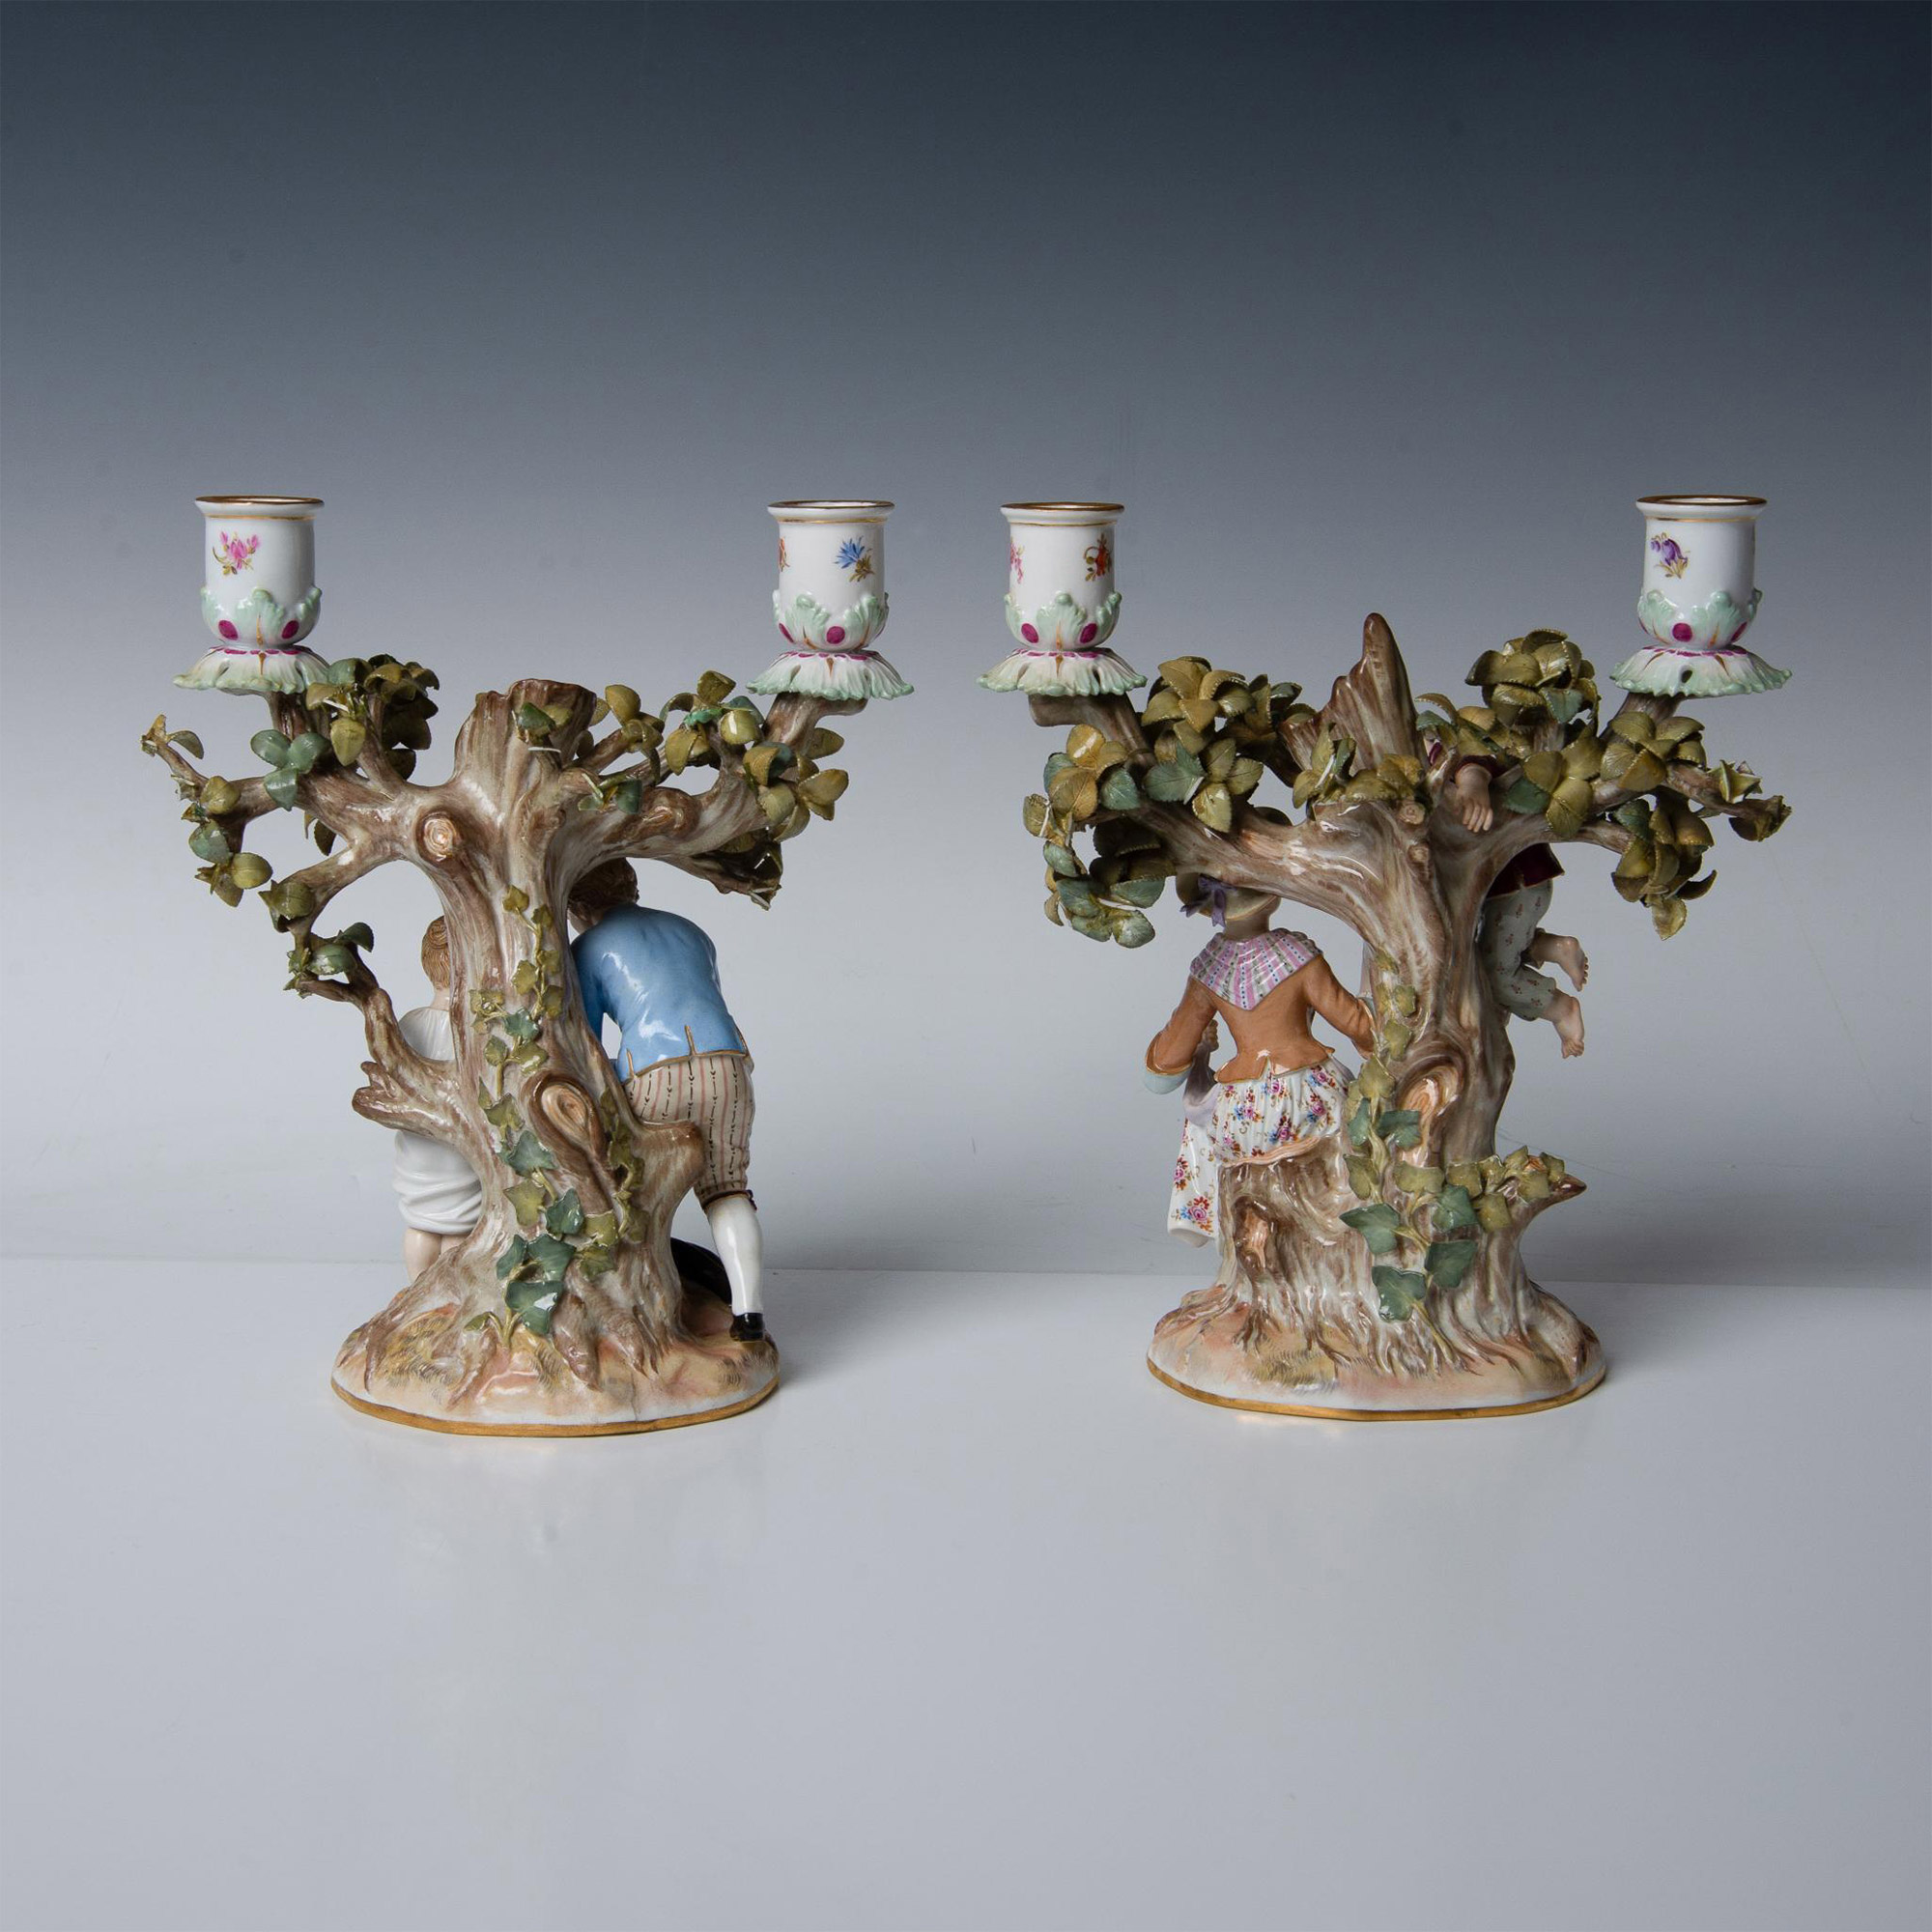 Pair of Meissen Porcelain Candle Holders, Egg Thieves - Image 3 of 9